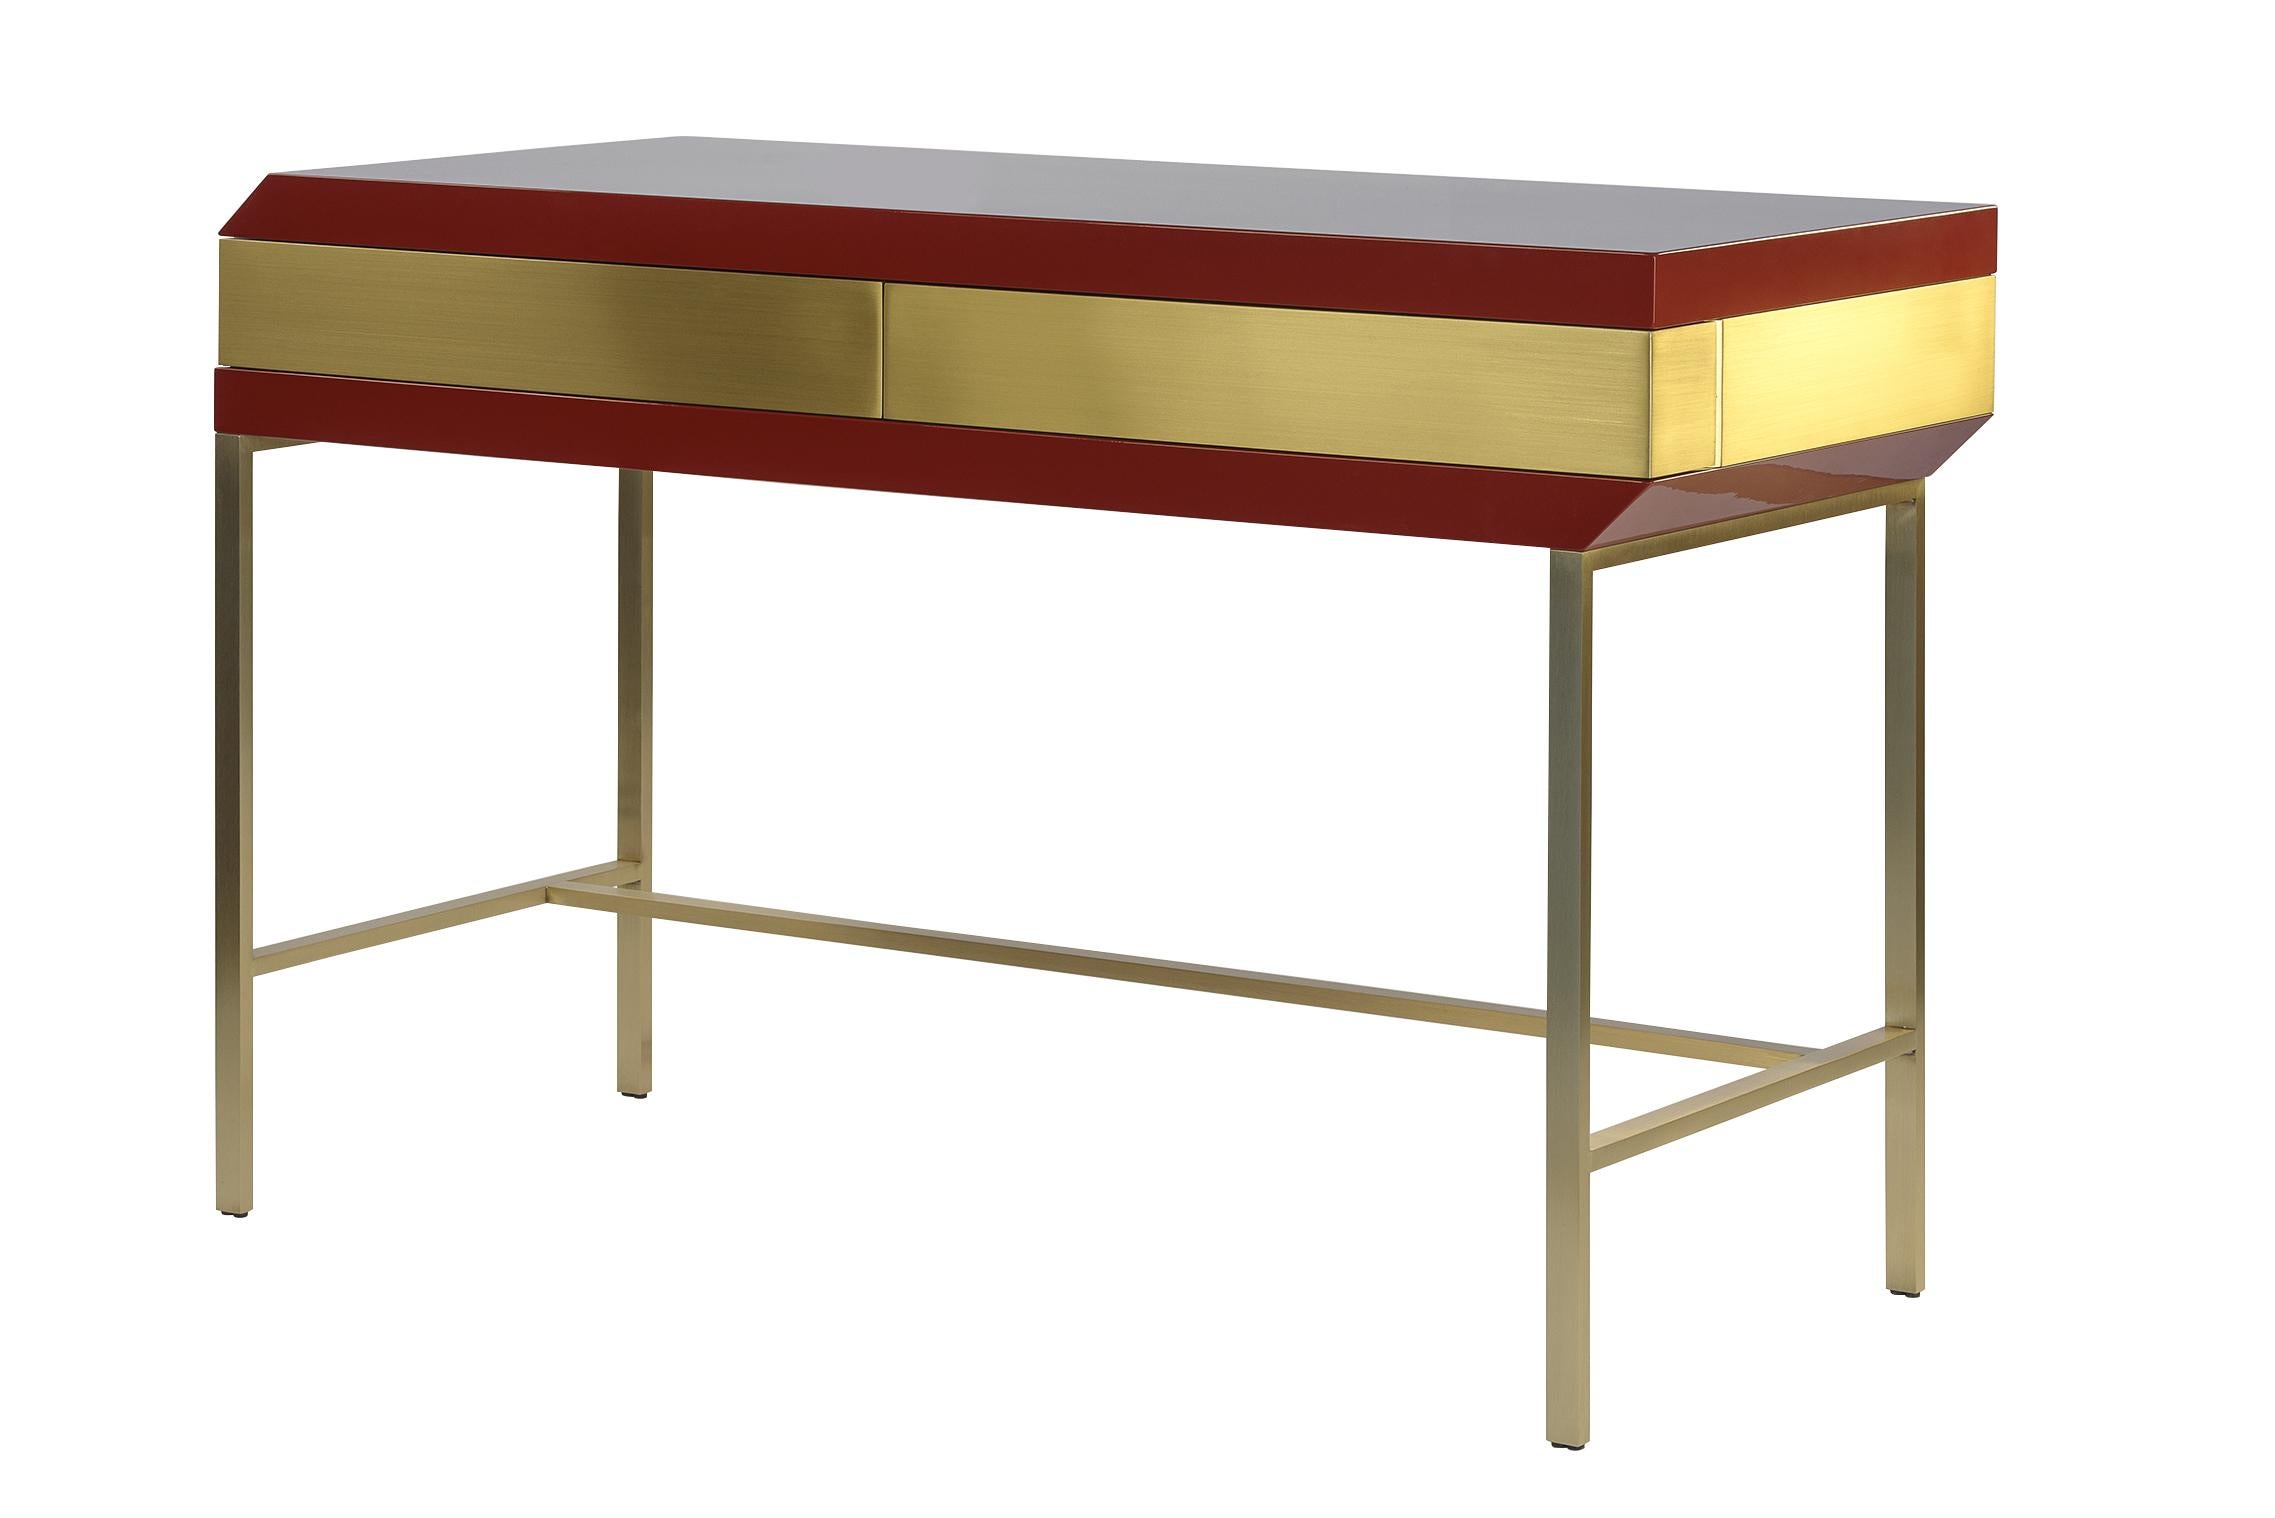 Flamingo desk table in lacquered wood and brass by Hagit Pincovici.

Flamingo desk is a sculpture inspired by Art Deco provides with the function of storing objects.
A spontaneous gesture reveals two hidden components below. 

Material: